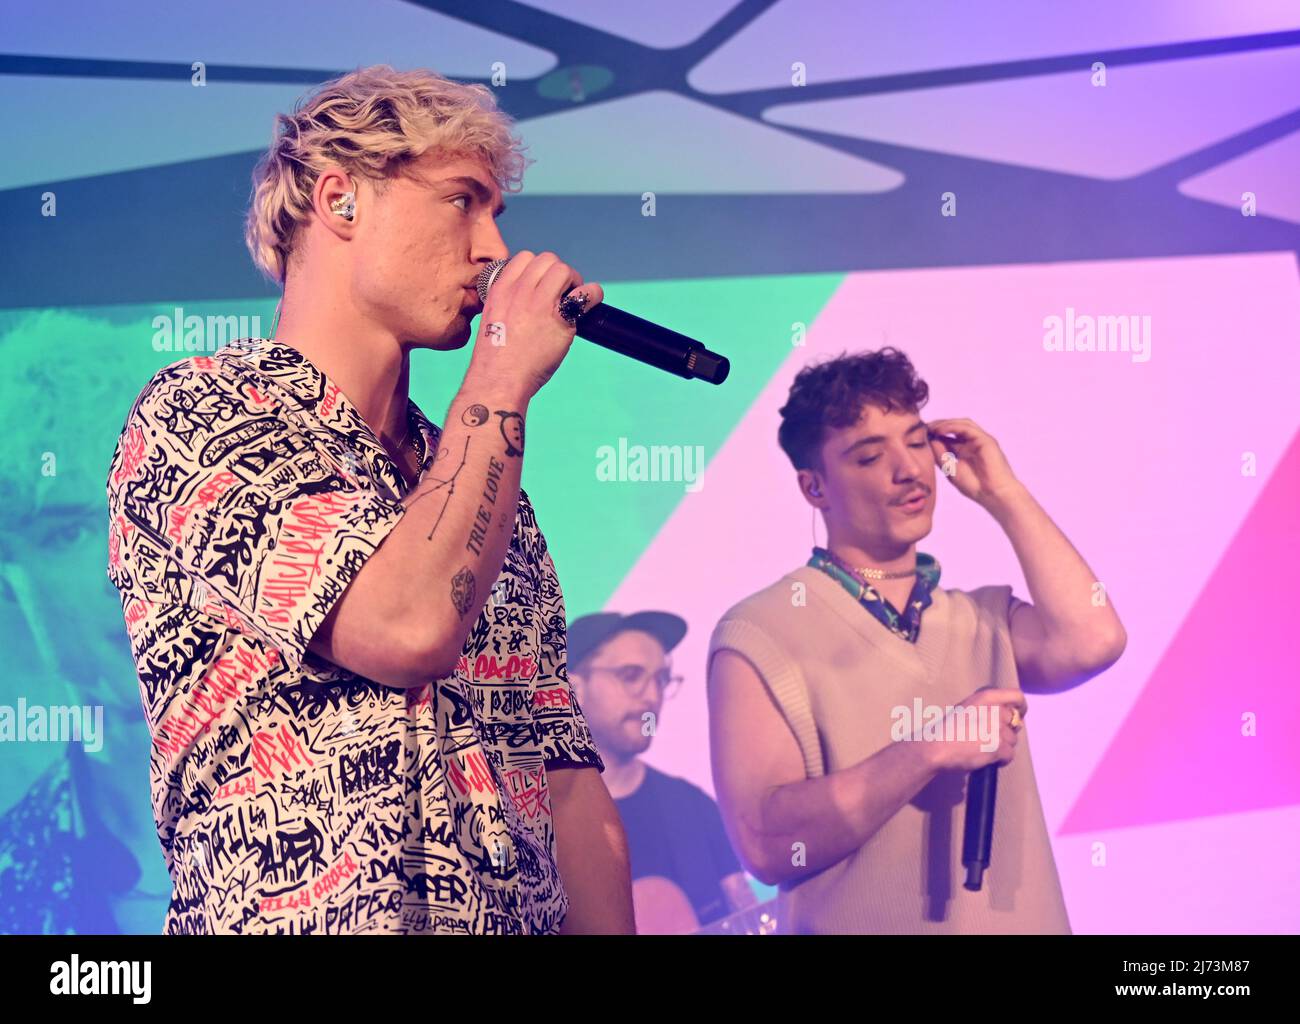 05 May 2022, Berlin: Heiko and Roman Lochmann from the duo "Die Lochis"  sing at the Bunte New Faces Award Music 2022. Photo: Britta Pedersen/dpa  Stock Photo - Alamy